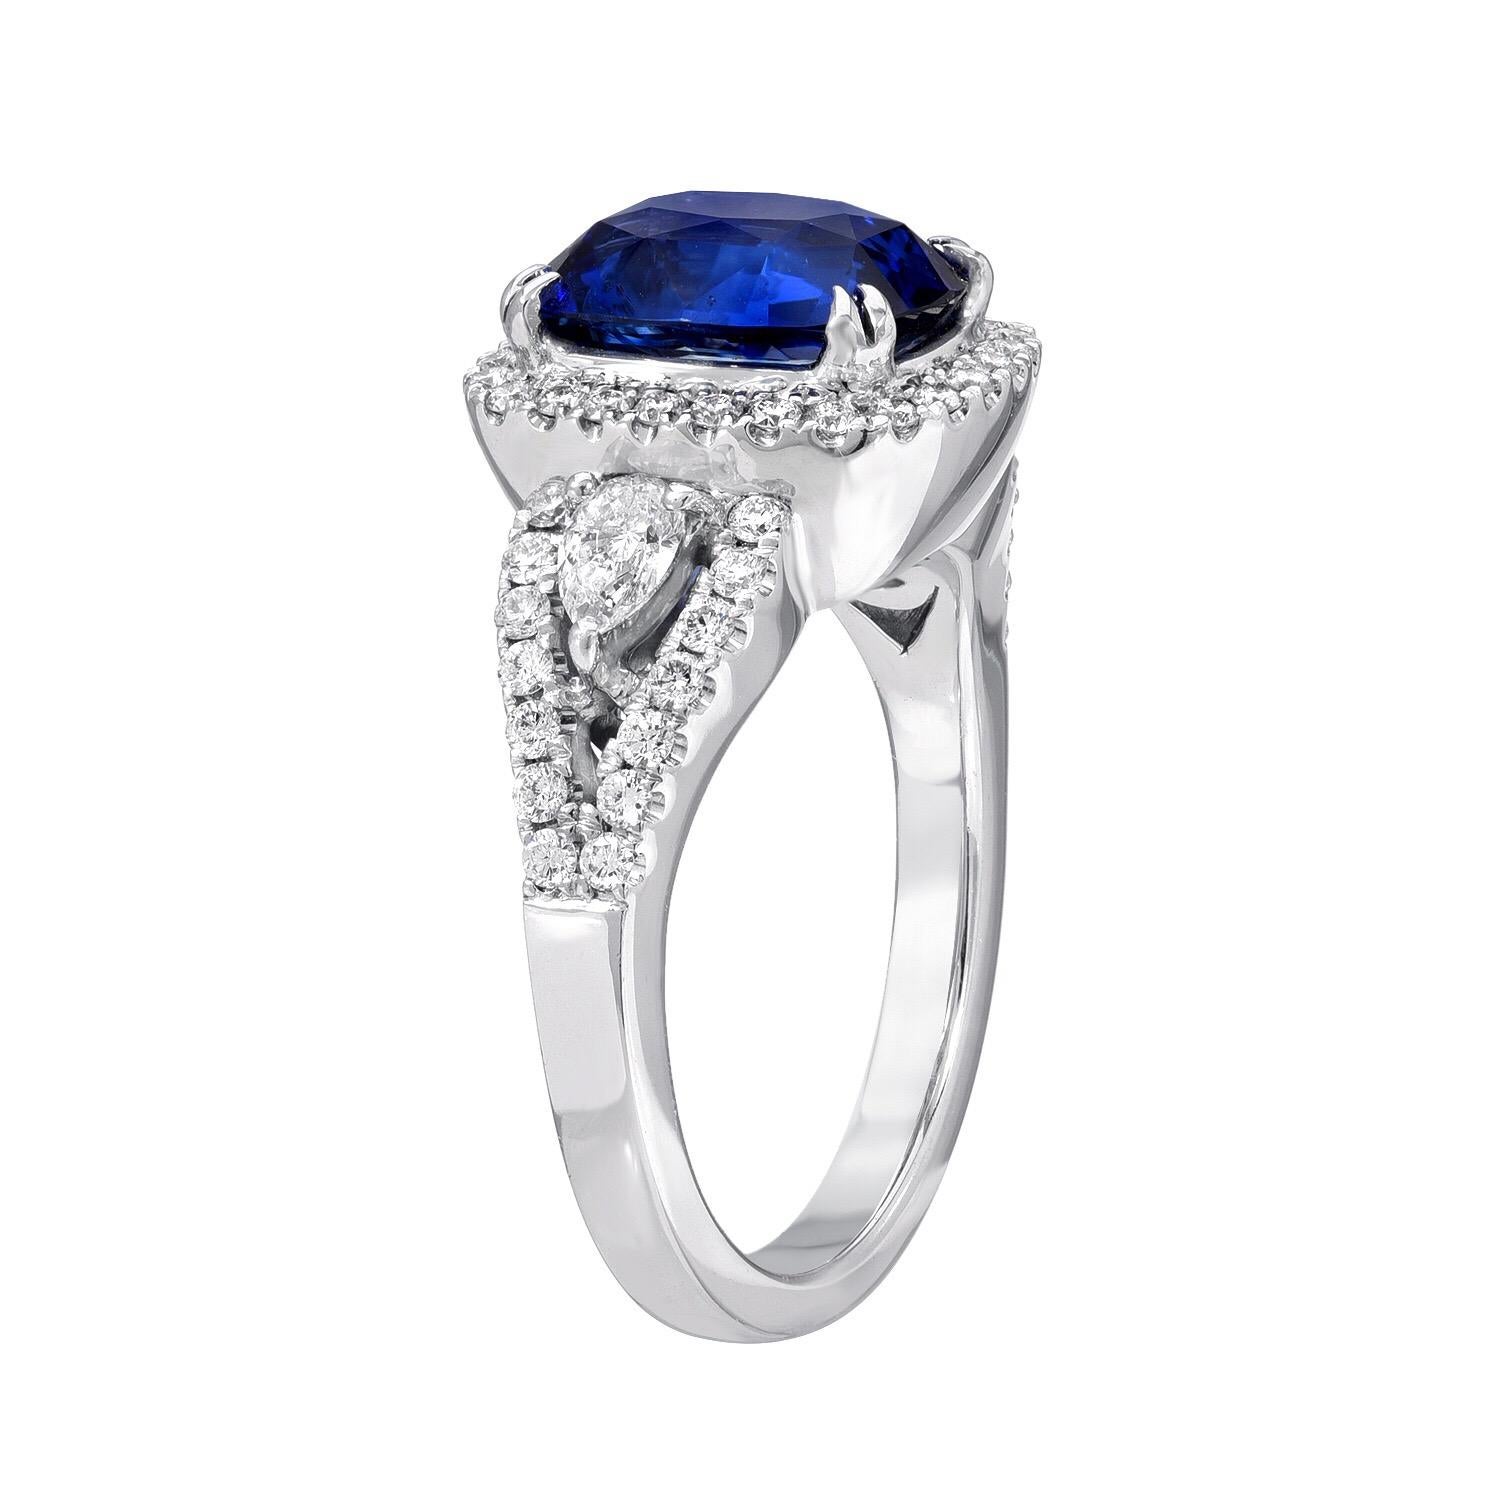 Sapphire ring showcasing a Blue Sapphire cushion cut, weighing a total of 3.24 carats, hand set in platinum, and adorned by a total of 0.75 diamonds.
Size 6.25. Re-sizing is complimentary upon request.
Returns are accepted and paid by us within 7